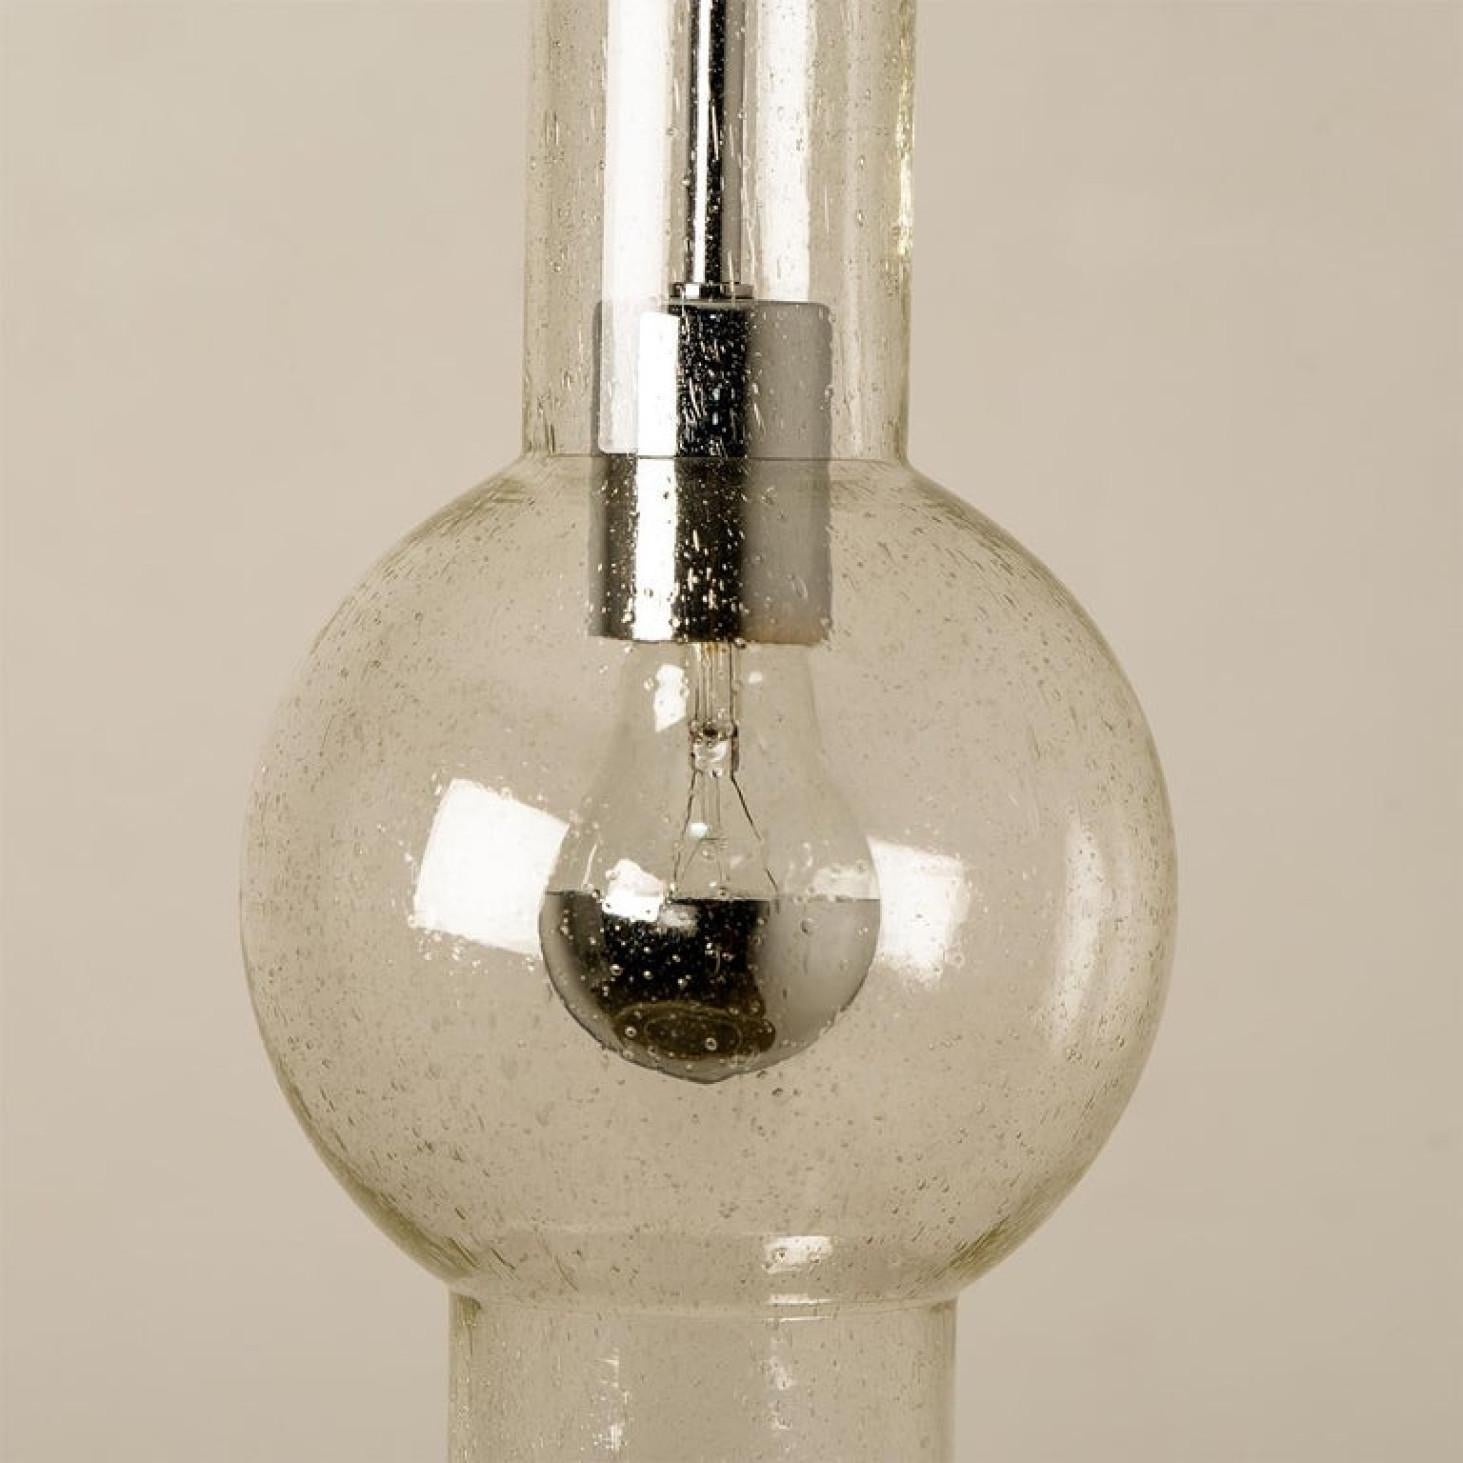 1 of the 10 of Hand Blown Glass Tube Pedant Lights by Staff Lights, 1970s For Sale 2